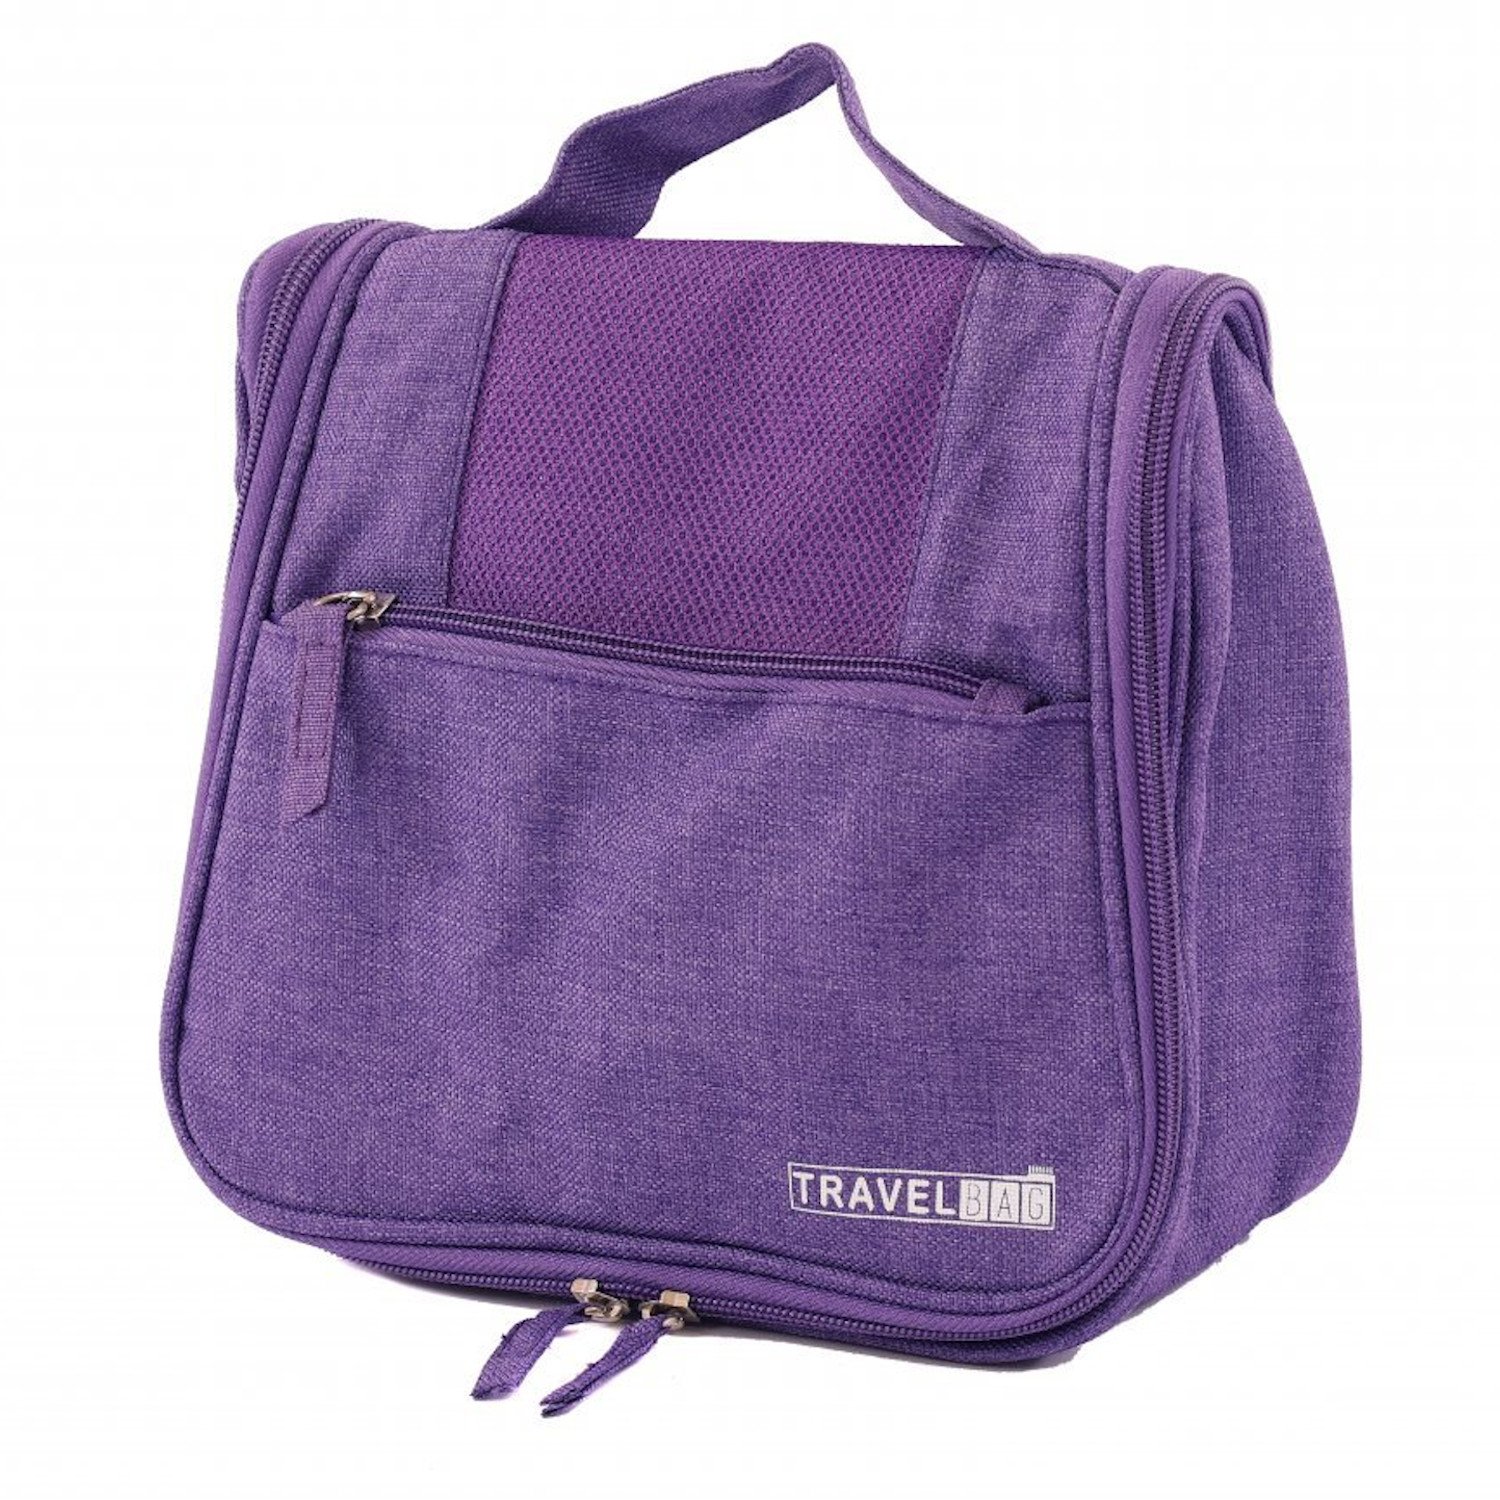 Waterproof Purple Hanging Toiletries Travel Wash Bag with Compartments